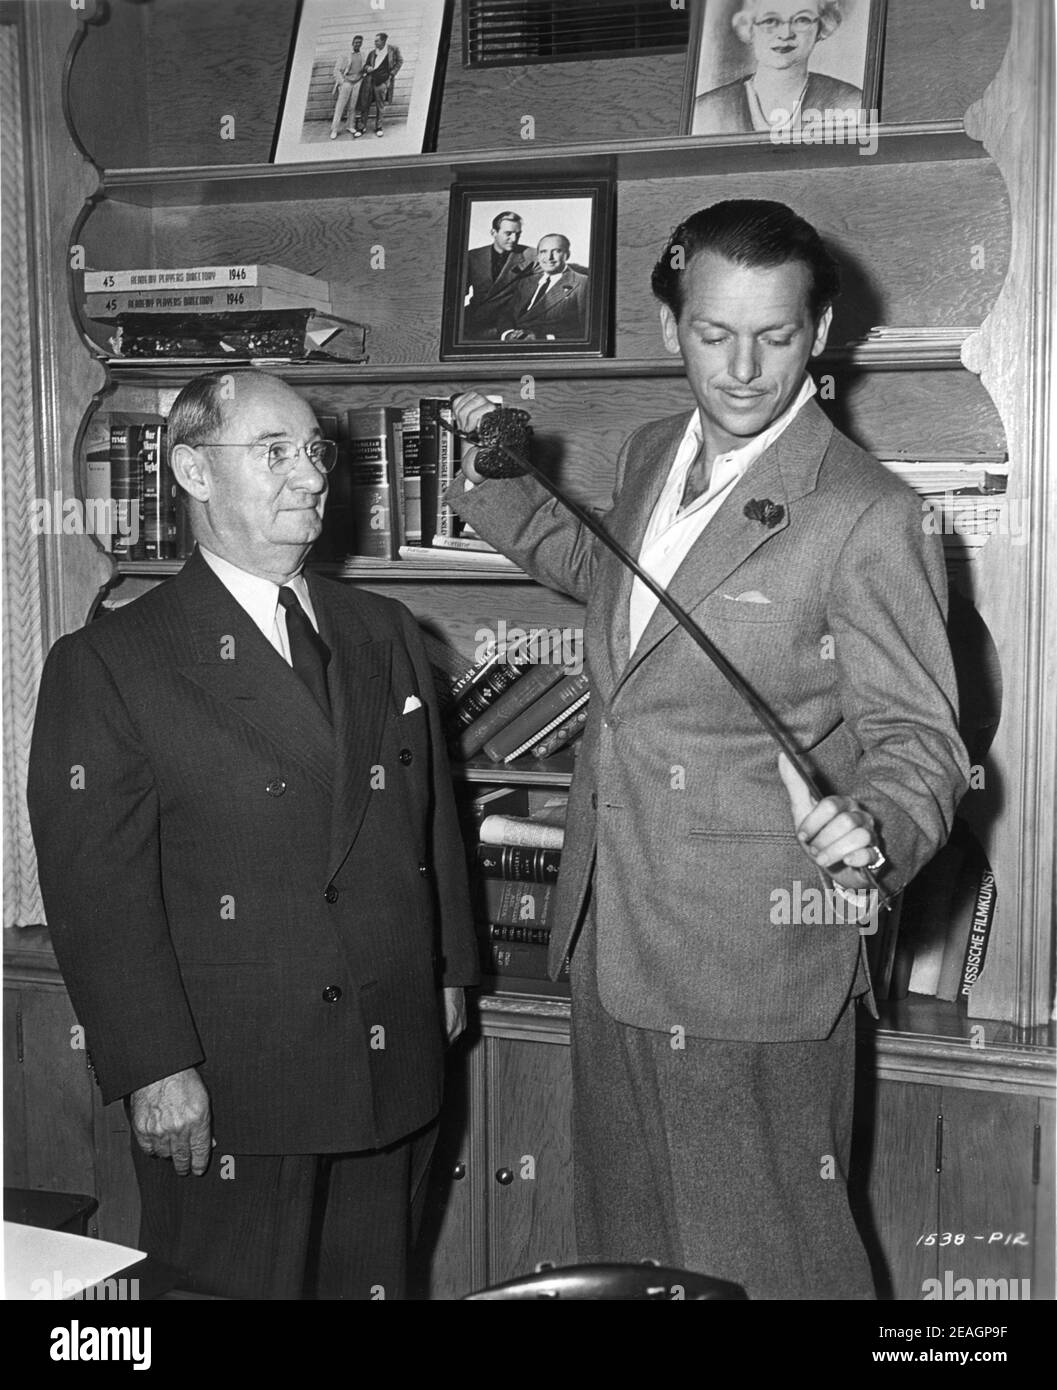 CLARENCE ERICKSEN former Business Manager of Douglas Fairbanks Sr for 25 years now doing same job for DOUGLAS FAIRBANKS Jr presents him with a sword used by his father in The Iron Mask behind the scenes candid during making of THE EXILE 1947 director MAX OPHULS producer Douglas Fairbanks Jr Fairbanks Company / Universal - International Stock Photo